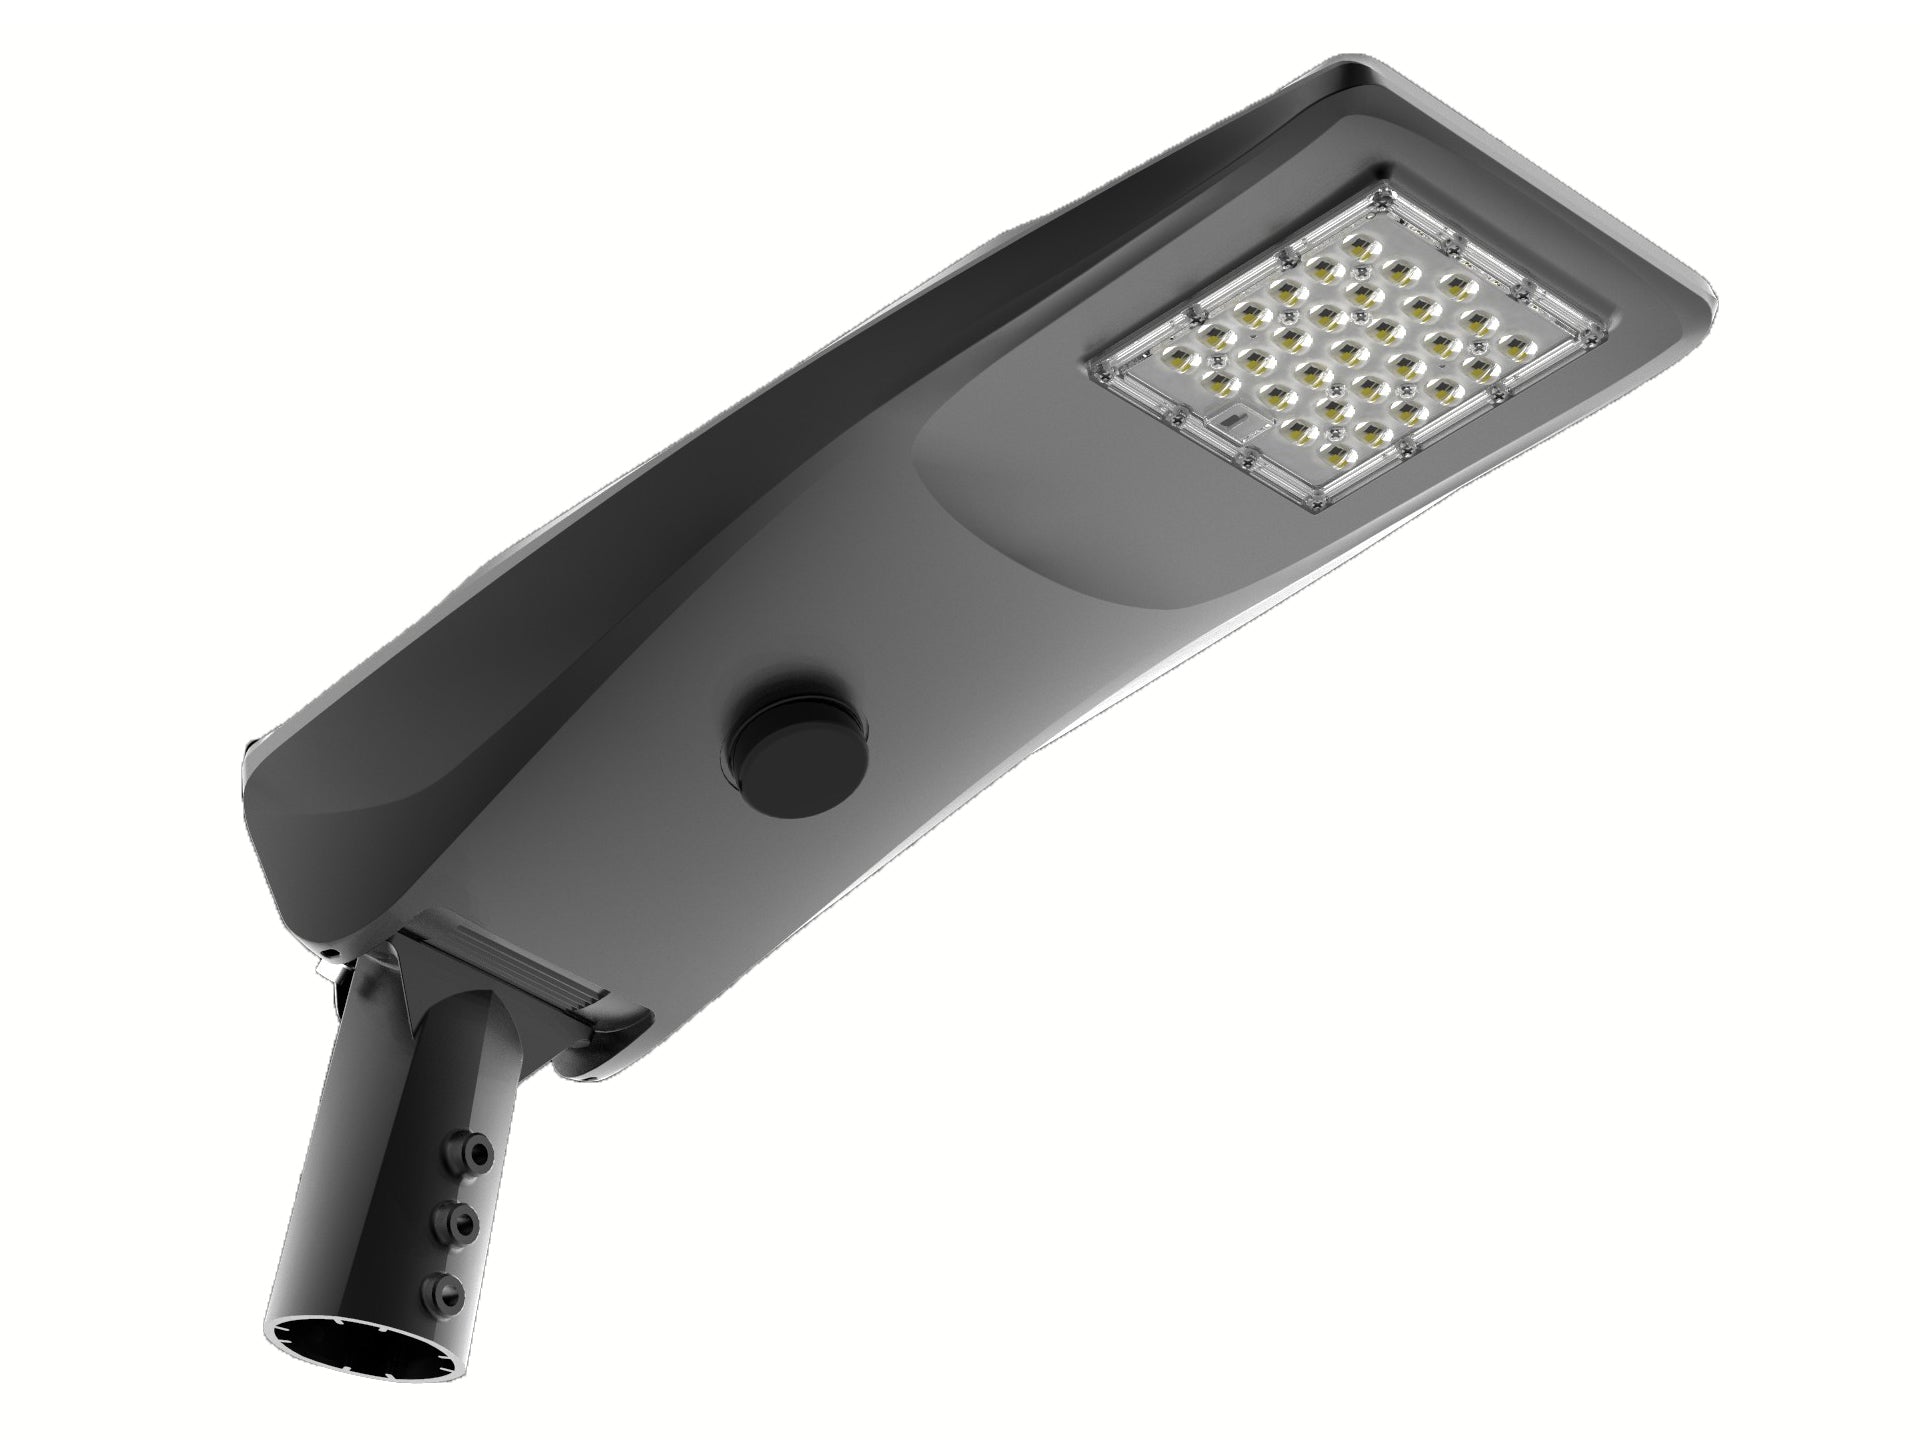 https://ledsion.com/collections/outdoor-lighting/products/solar-intelligent-smart-led-street-light